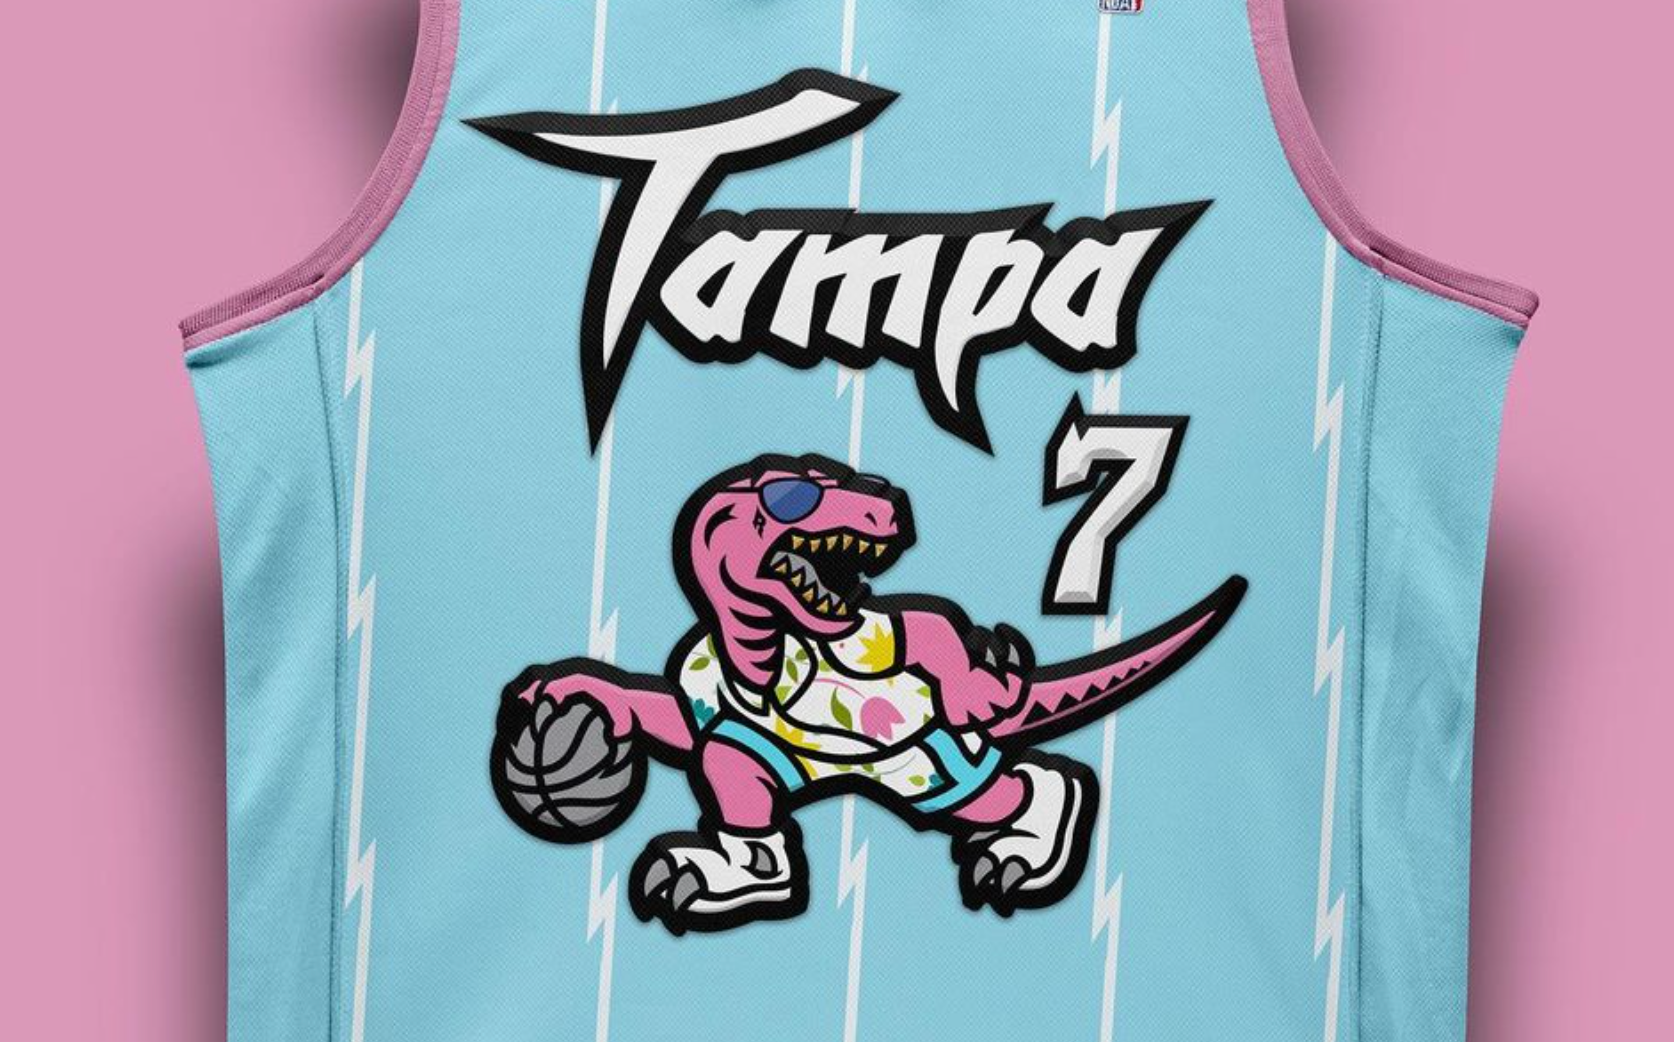 This is the jersey Tampa deserves